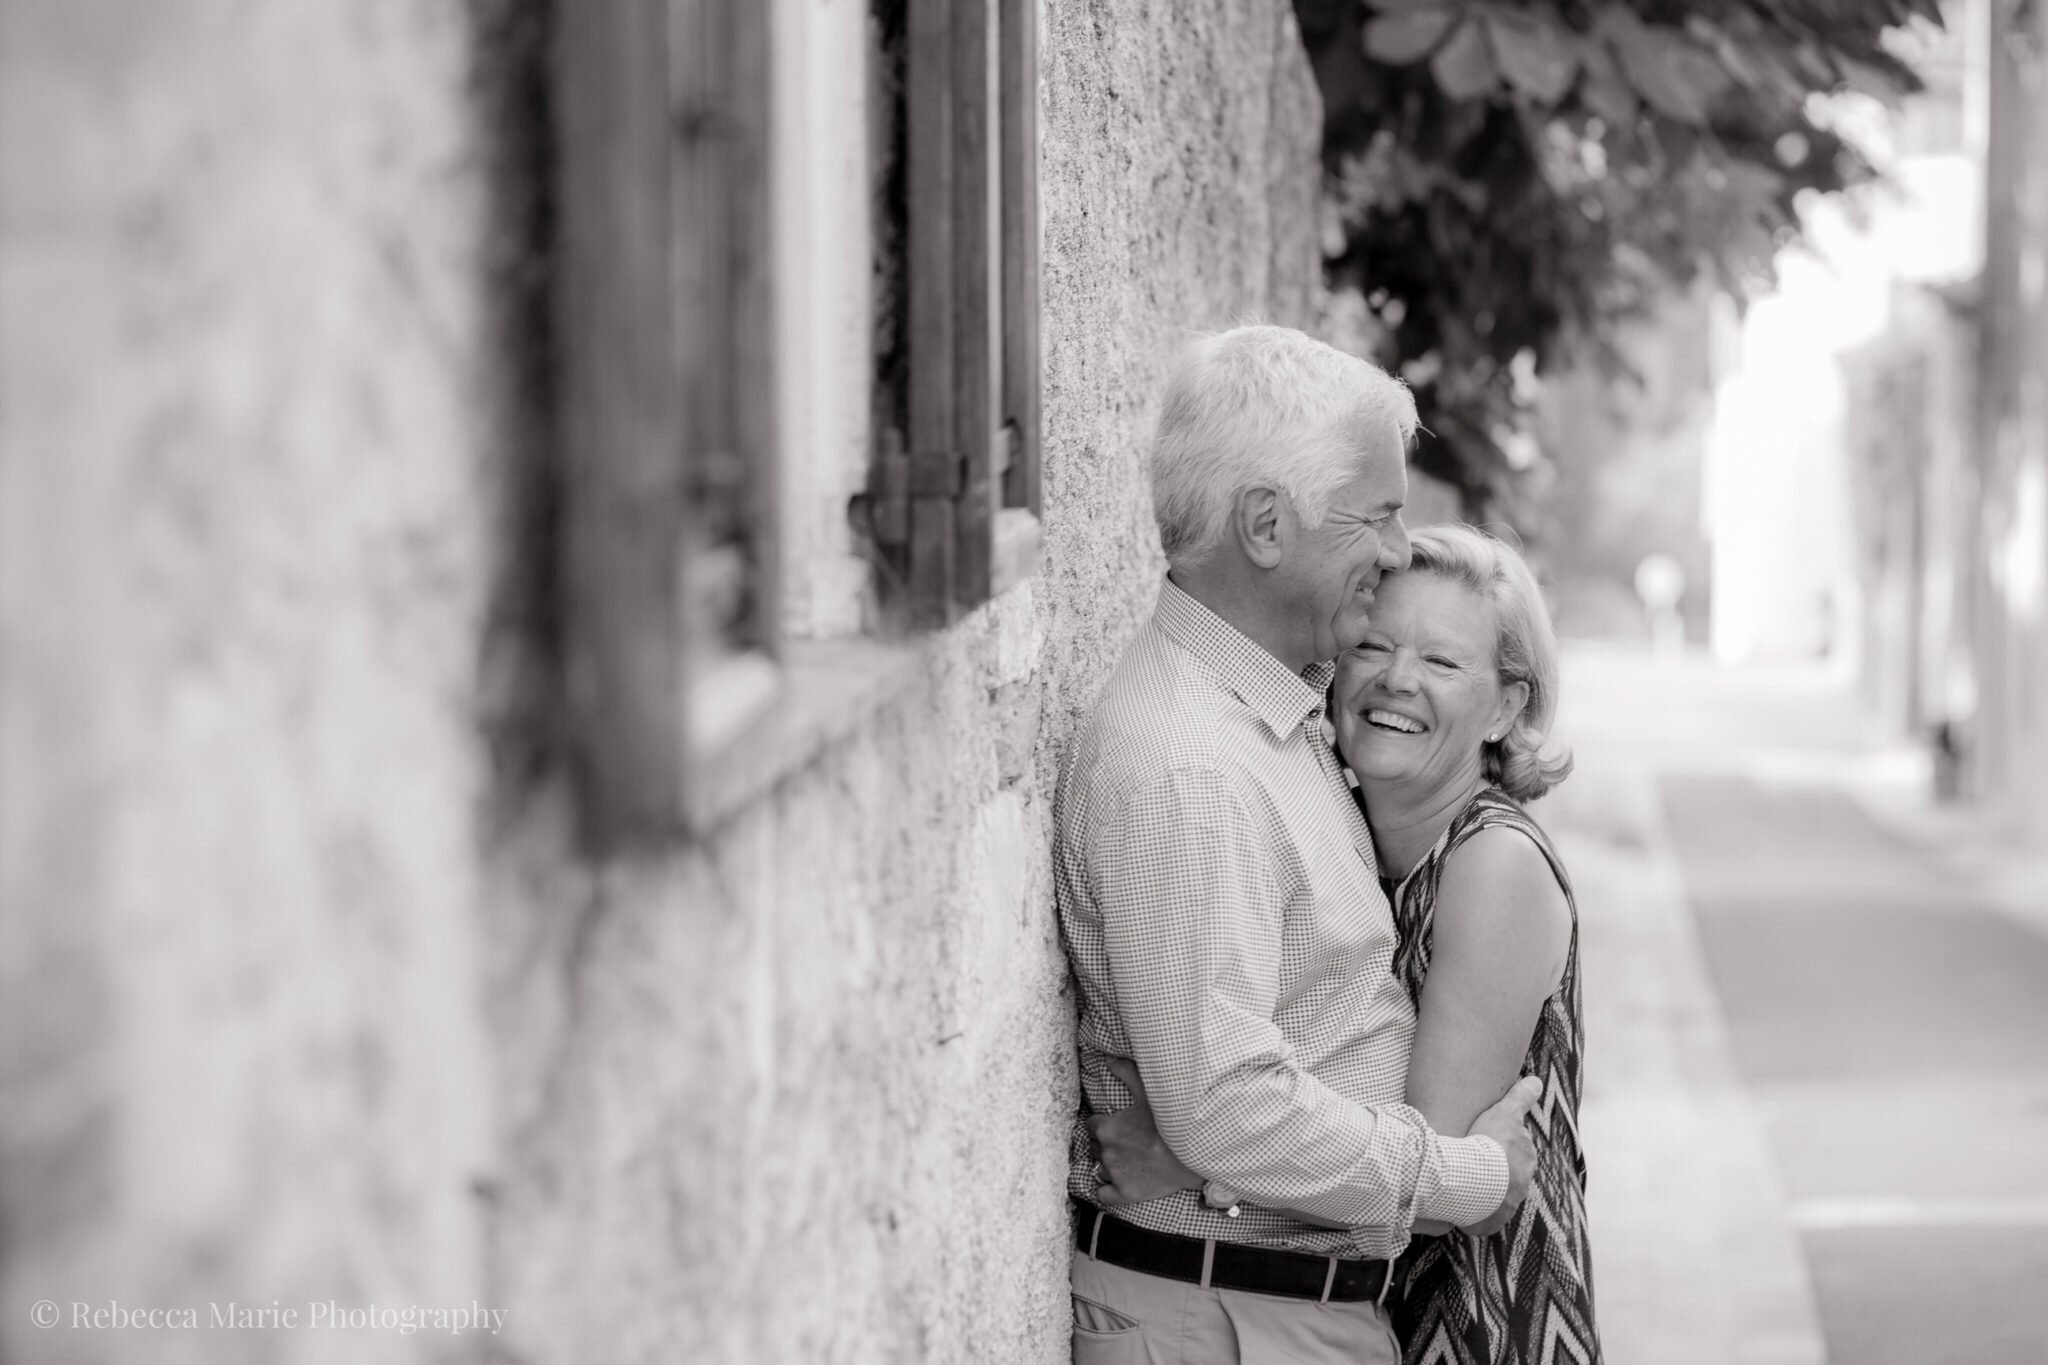 Portraits-in-France-Valbonne-Rebecca-Marie-Photography-9-1